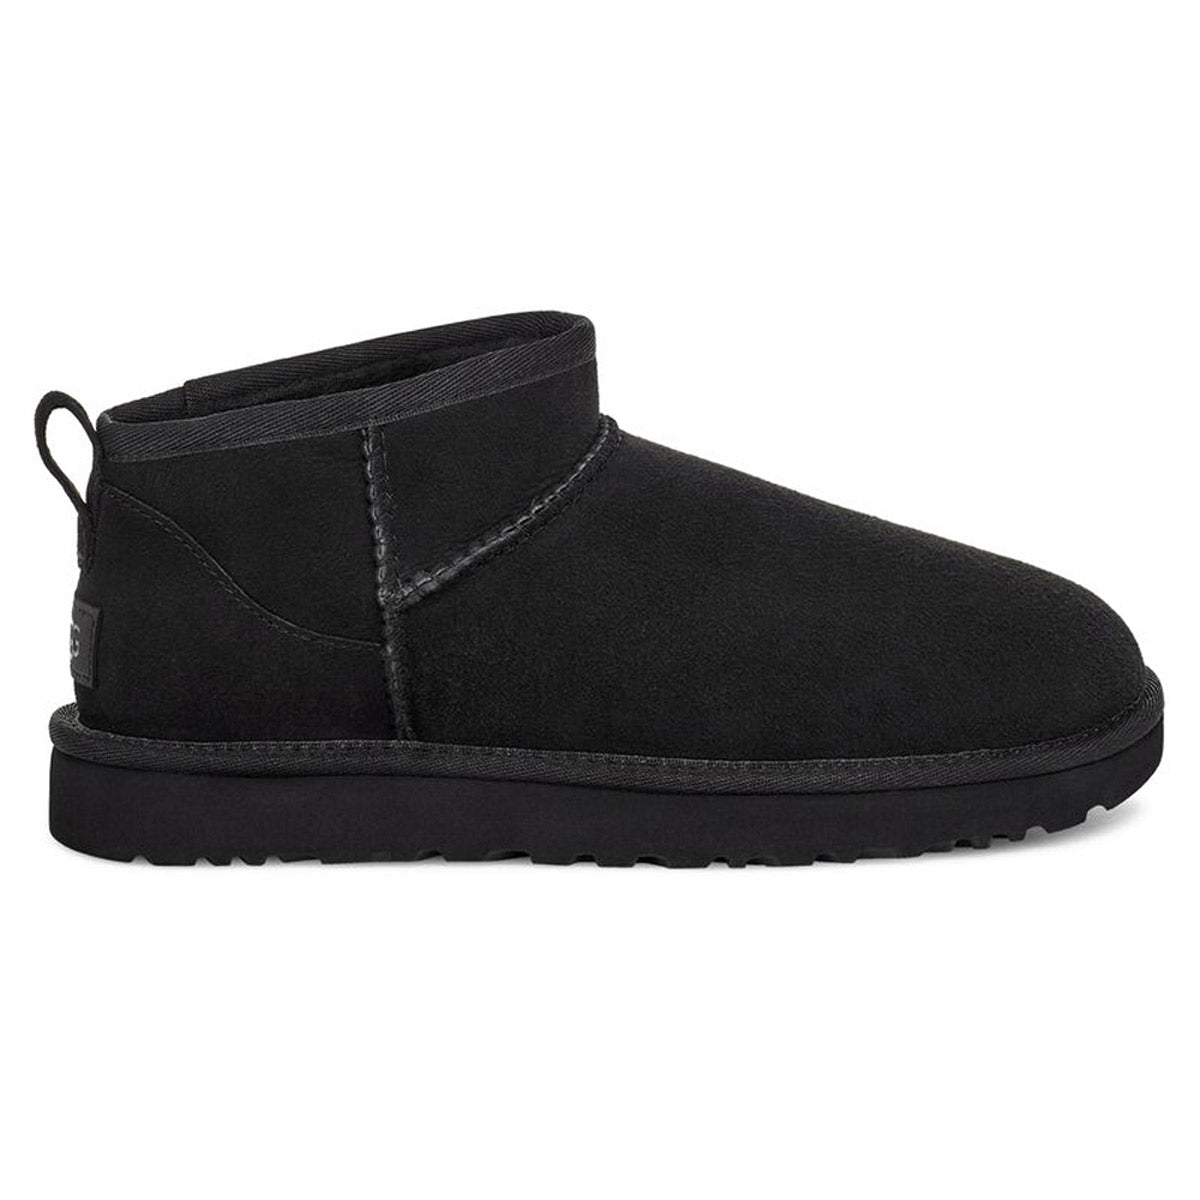 Black suede ankle boot with a Treadlite by Ugg outsole and a rear pull tab.